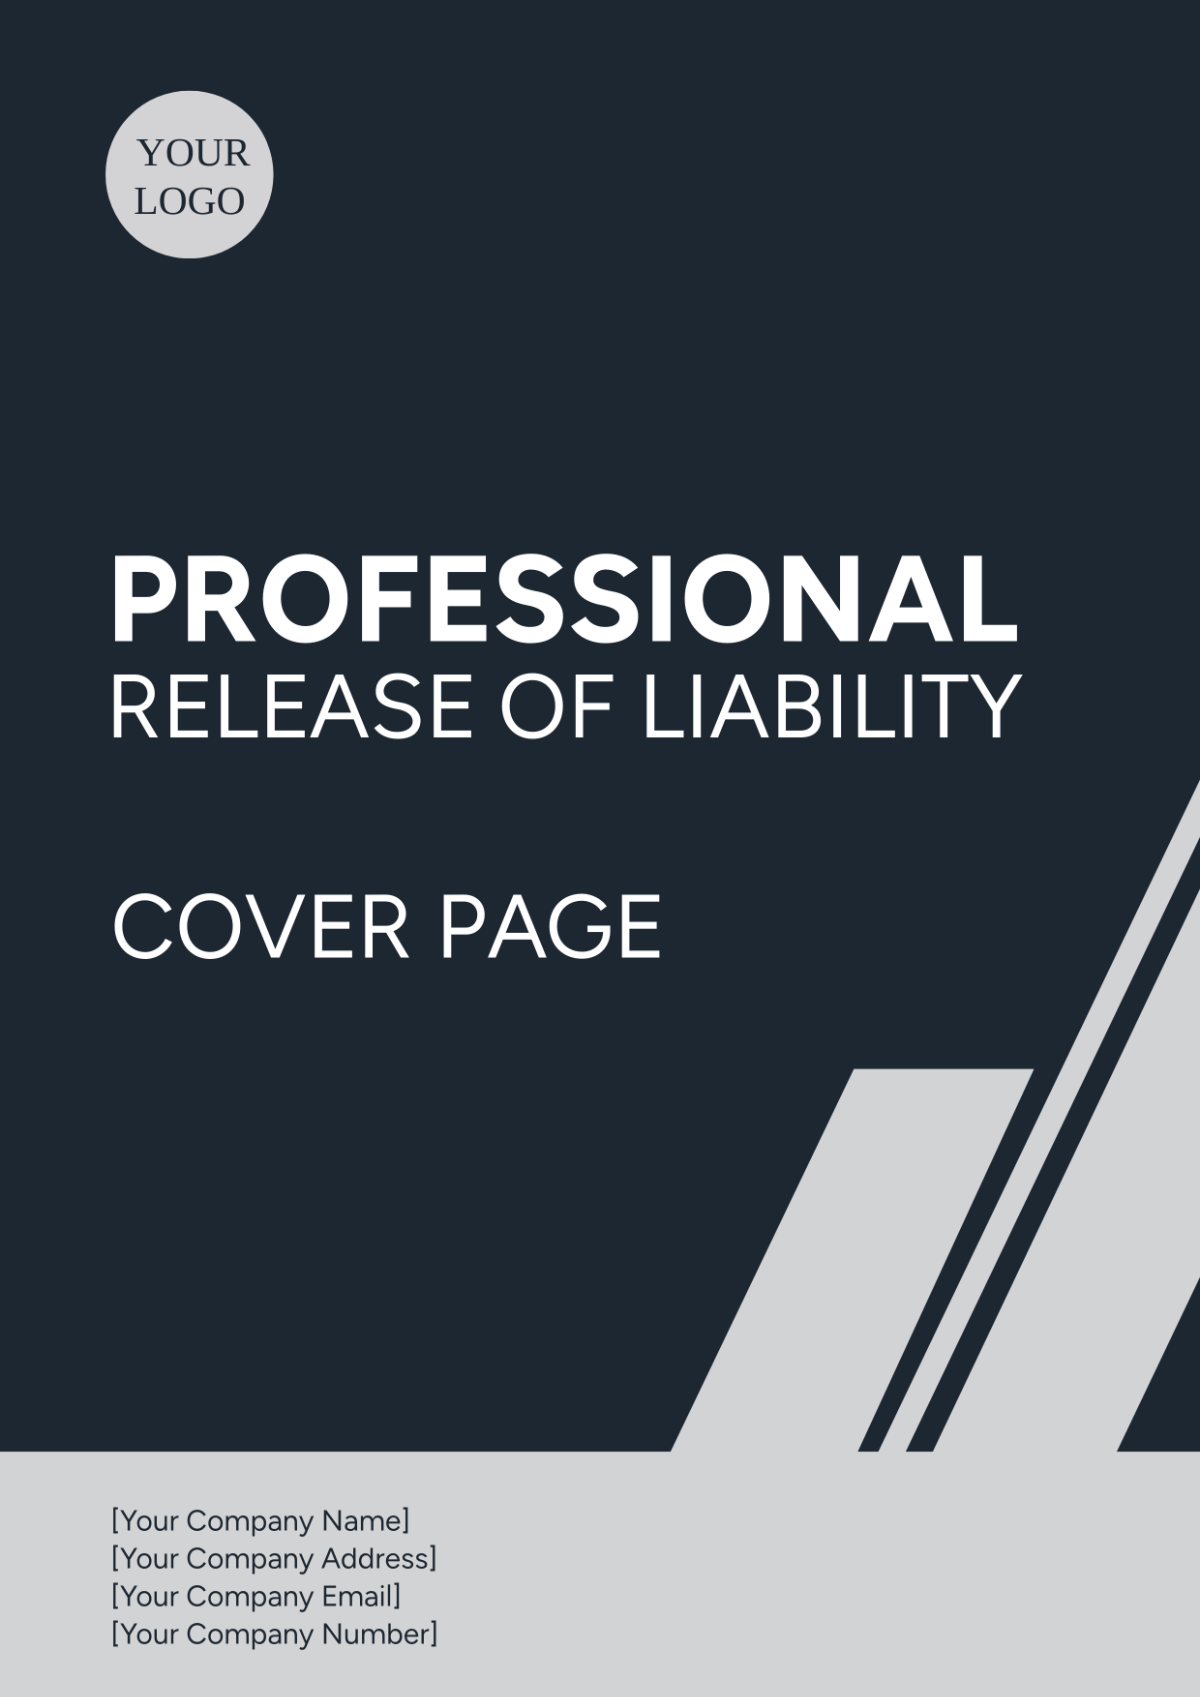 Professional Release of Liability Cover Page